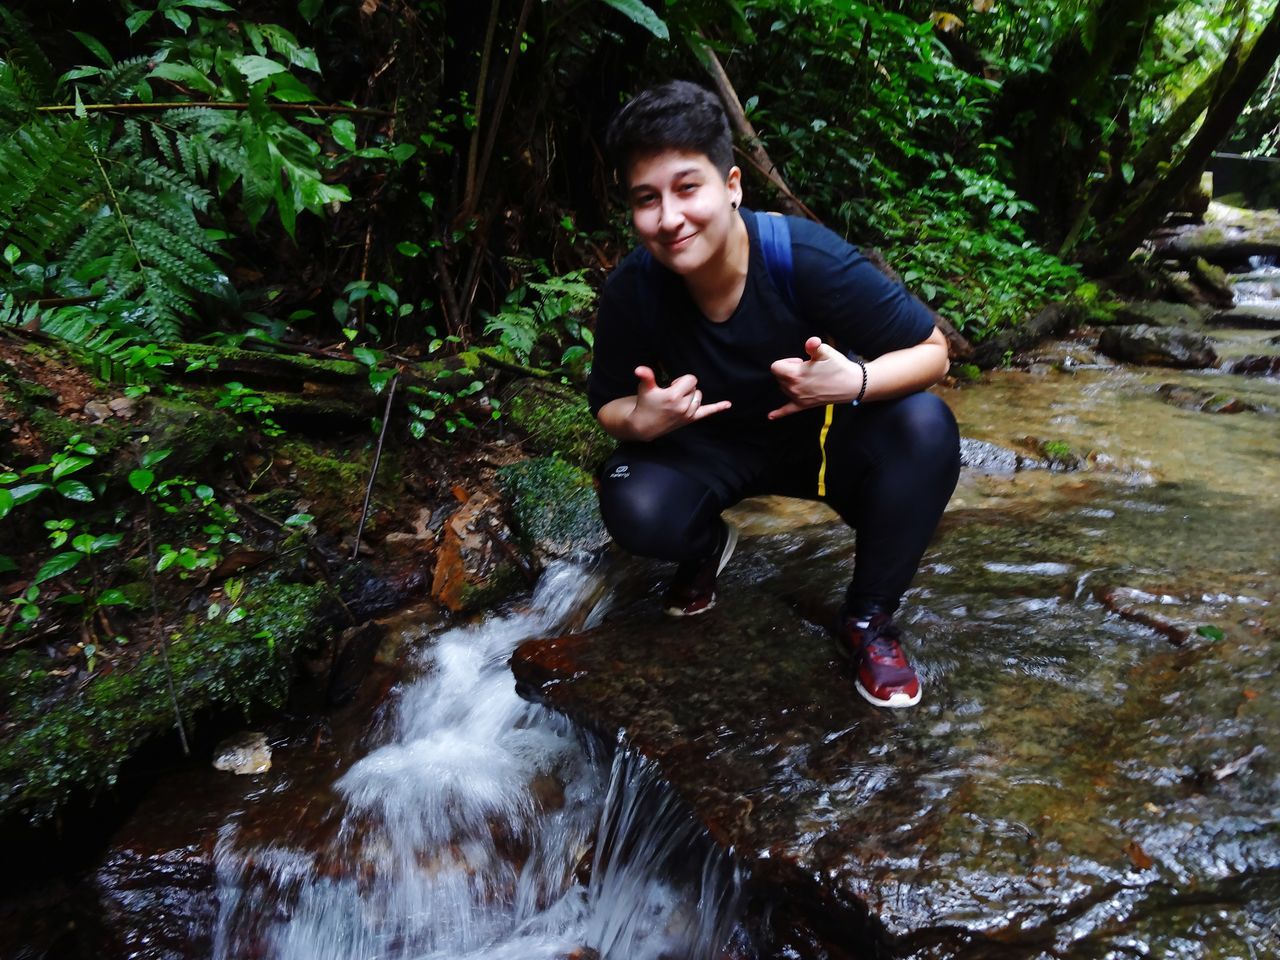 water, one person, nature, stream, tree, forest, plant, waterfall, jungle, river, leisure activity, full length, young adult, adult, wilderness, sitting, lifestyles, rock, motion, land, rainforest, beauty in nature, outdoors, flowing water, environment, day, smiling, men, sports, water feature, activity, casual clothing, front view, portrait, happiness